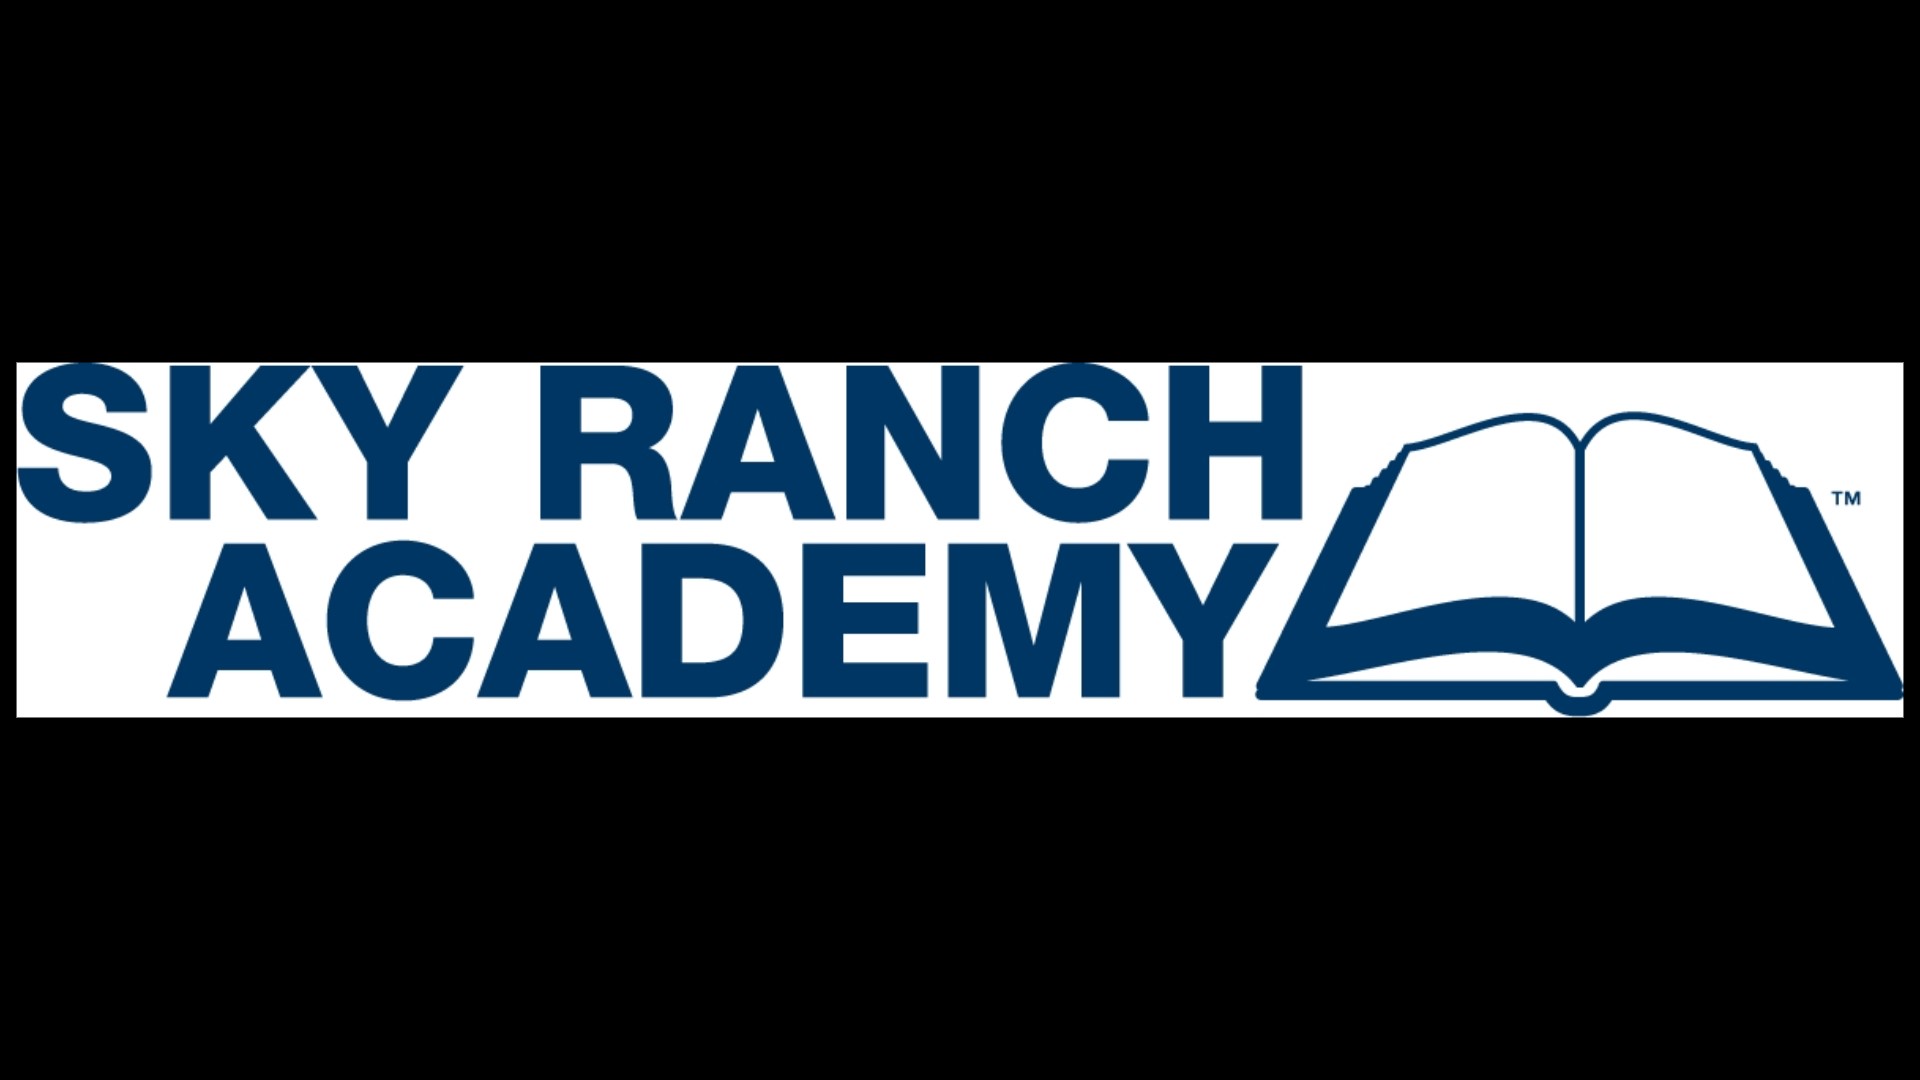 Learn more about Sky Ranch Academy at SkyRanchAcademy.com/TV or call 720.574.9548. **PAID CONTENT**